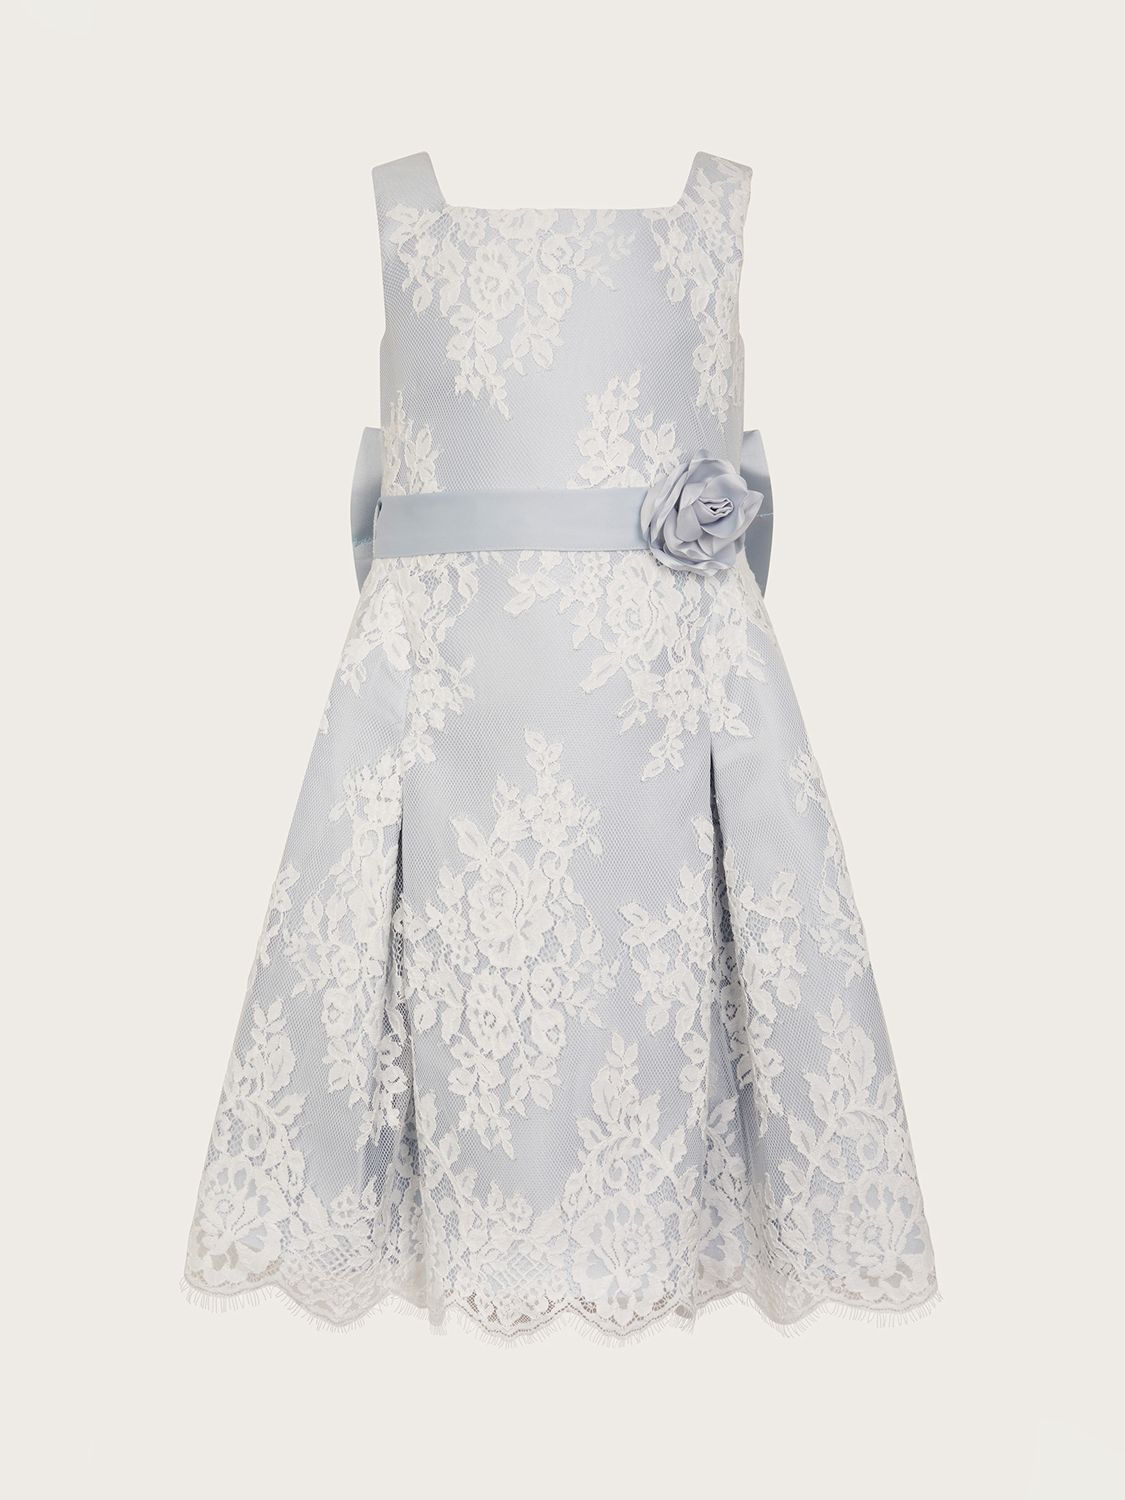 Monsoon Kids' Floral Lace Bow Detail Occasion Dress, Pale Blue, 14-15 years